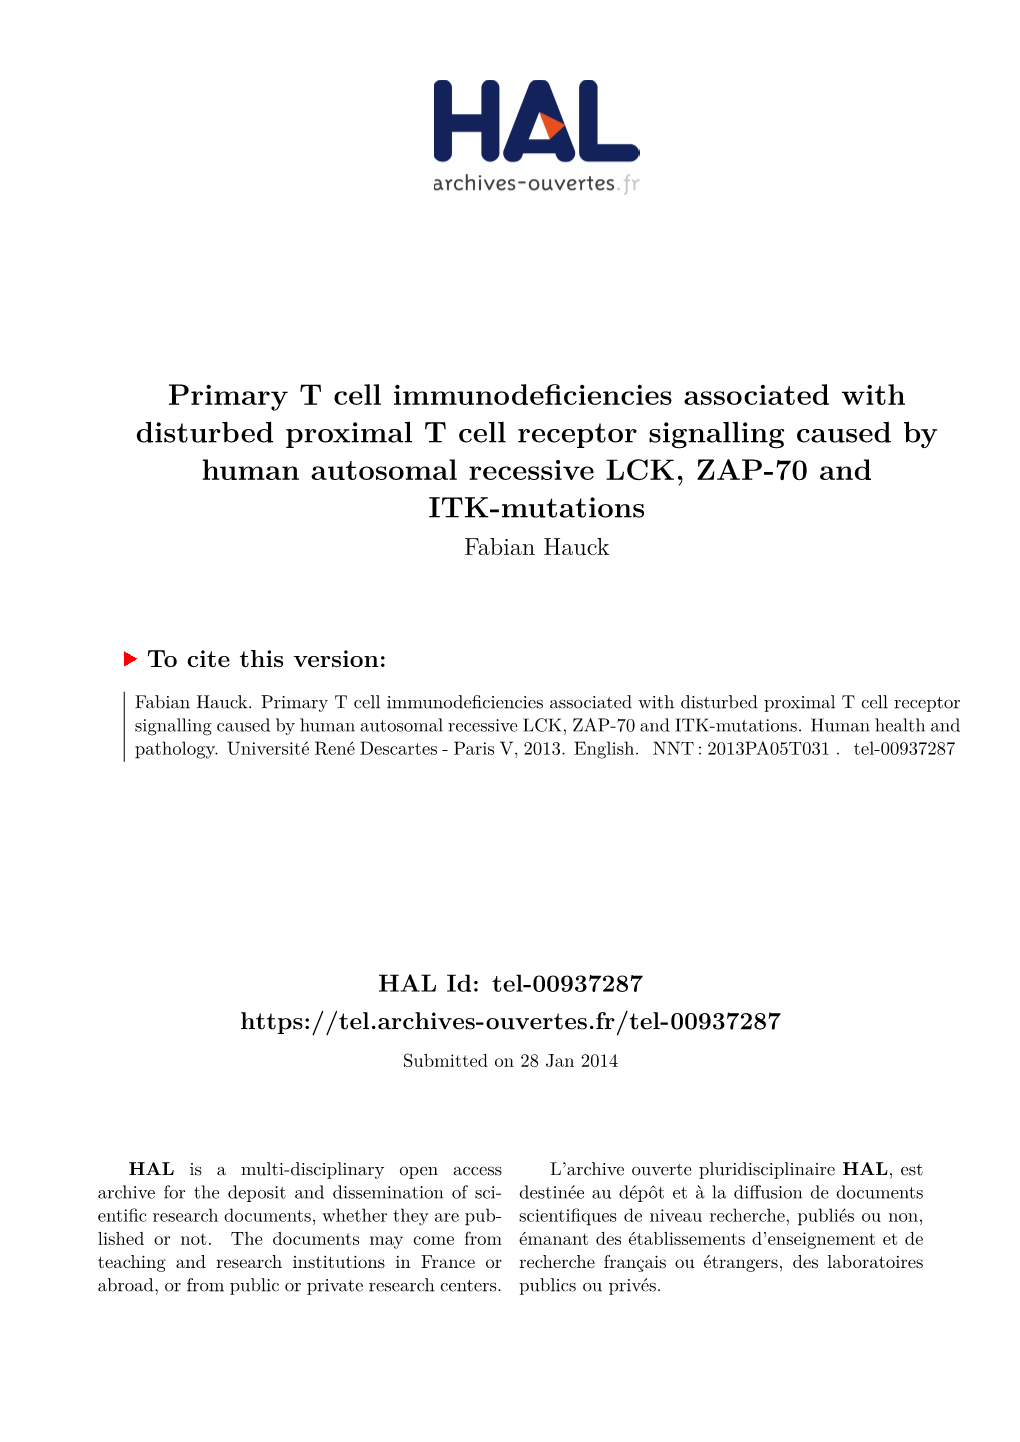 Primary T Cell Immunodeficiencies Associated with Disturbed Proximal